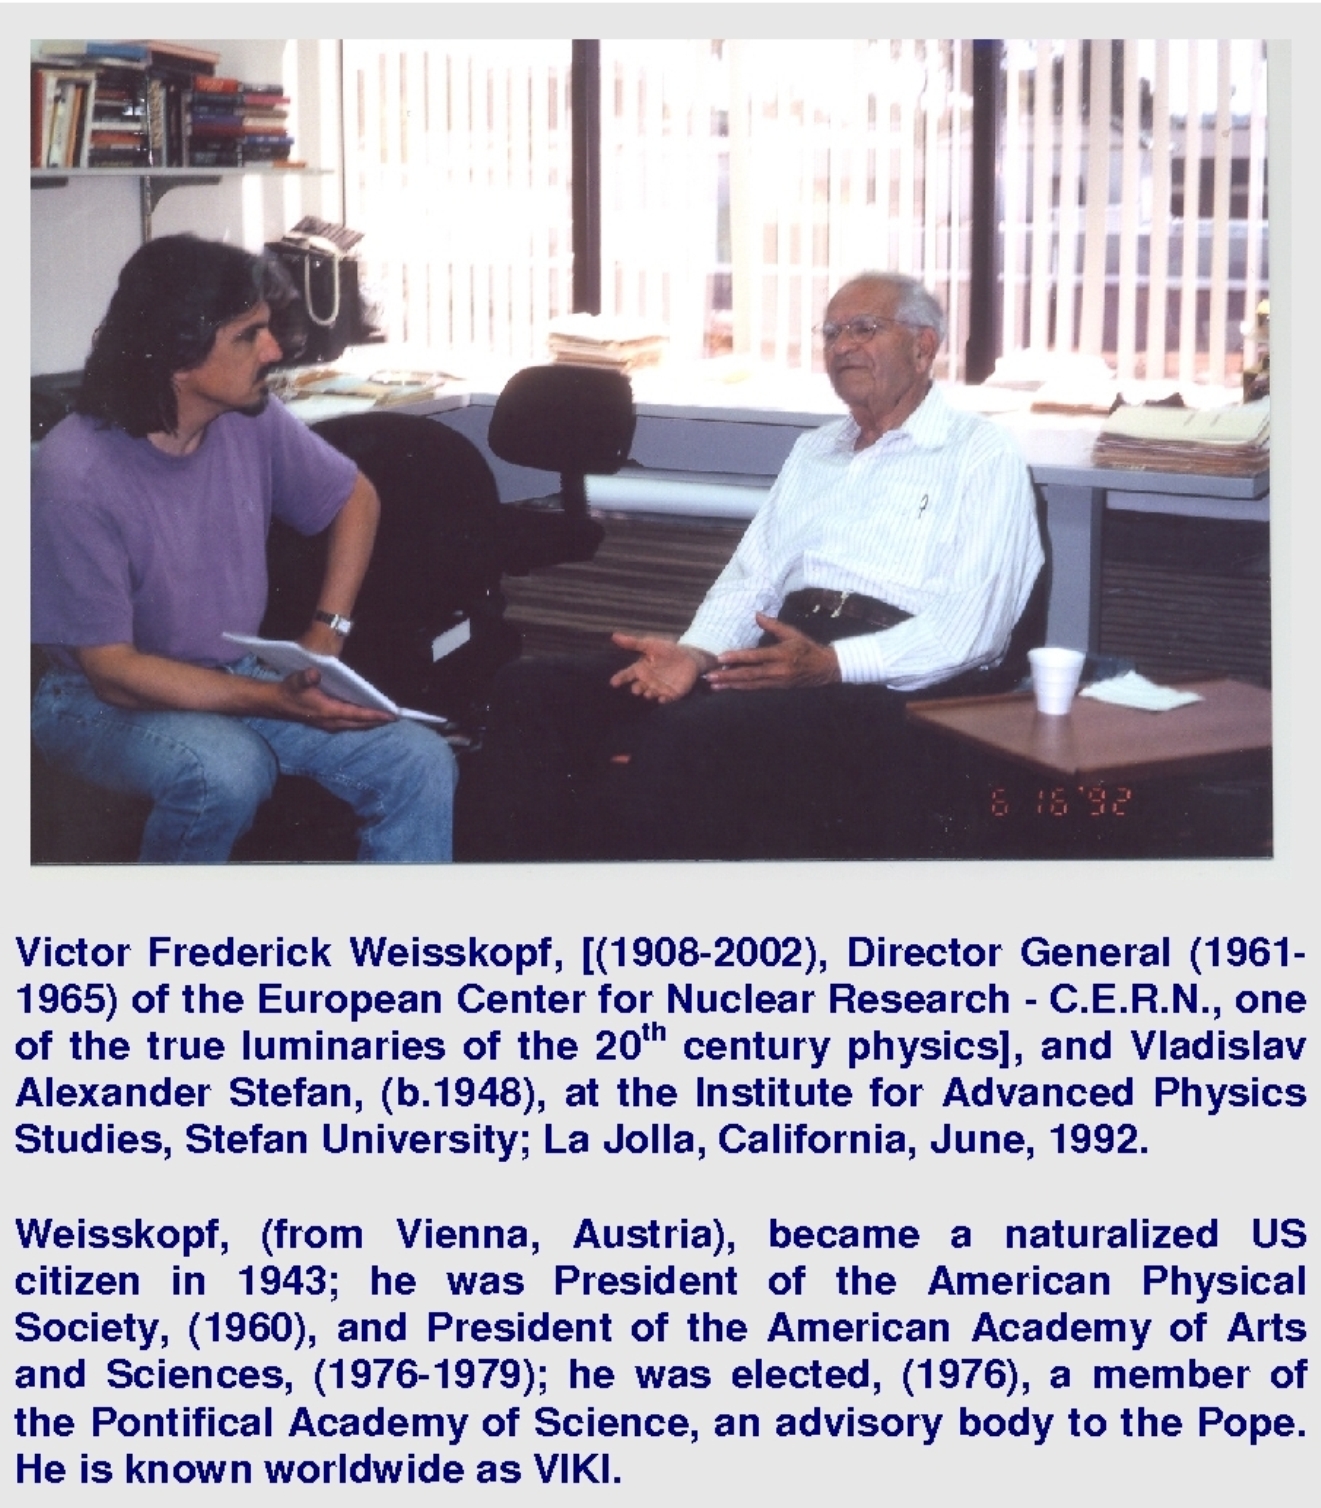 Victor Frederick Weisskopf, [(1908-2002), Director General (1961-1965) of the European Center for Nuclear Research - C.E.R.N., one of the true luminaries of the 20th century physics], and Vladislav Alexander Stefan, (b.1948), at the Institute for Advanced Physics Studies, Stefan University; La Jolla, California, June, 1992. Weisskopf, (from Vienna, Austria), became a naturalized US citizen in 1943; he was President of the American Physical Society, (1960), and President of the American Academy of Arts and Sciences, (1976-1979); he was elected, (1976), a member of the Pontifical Academy of Science, an advisory body to the Pope. He is known worldwide as VIKI.